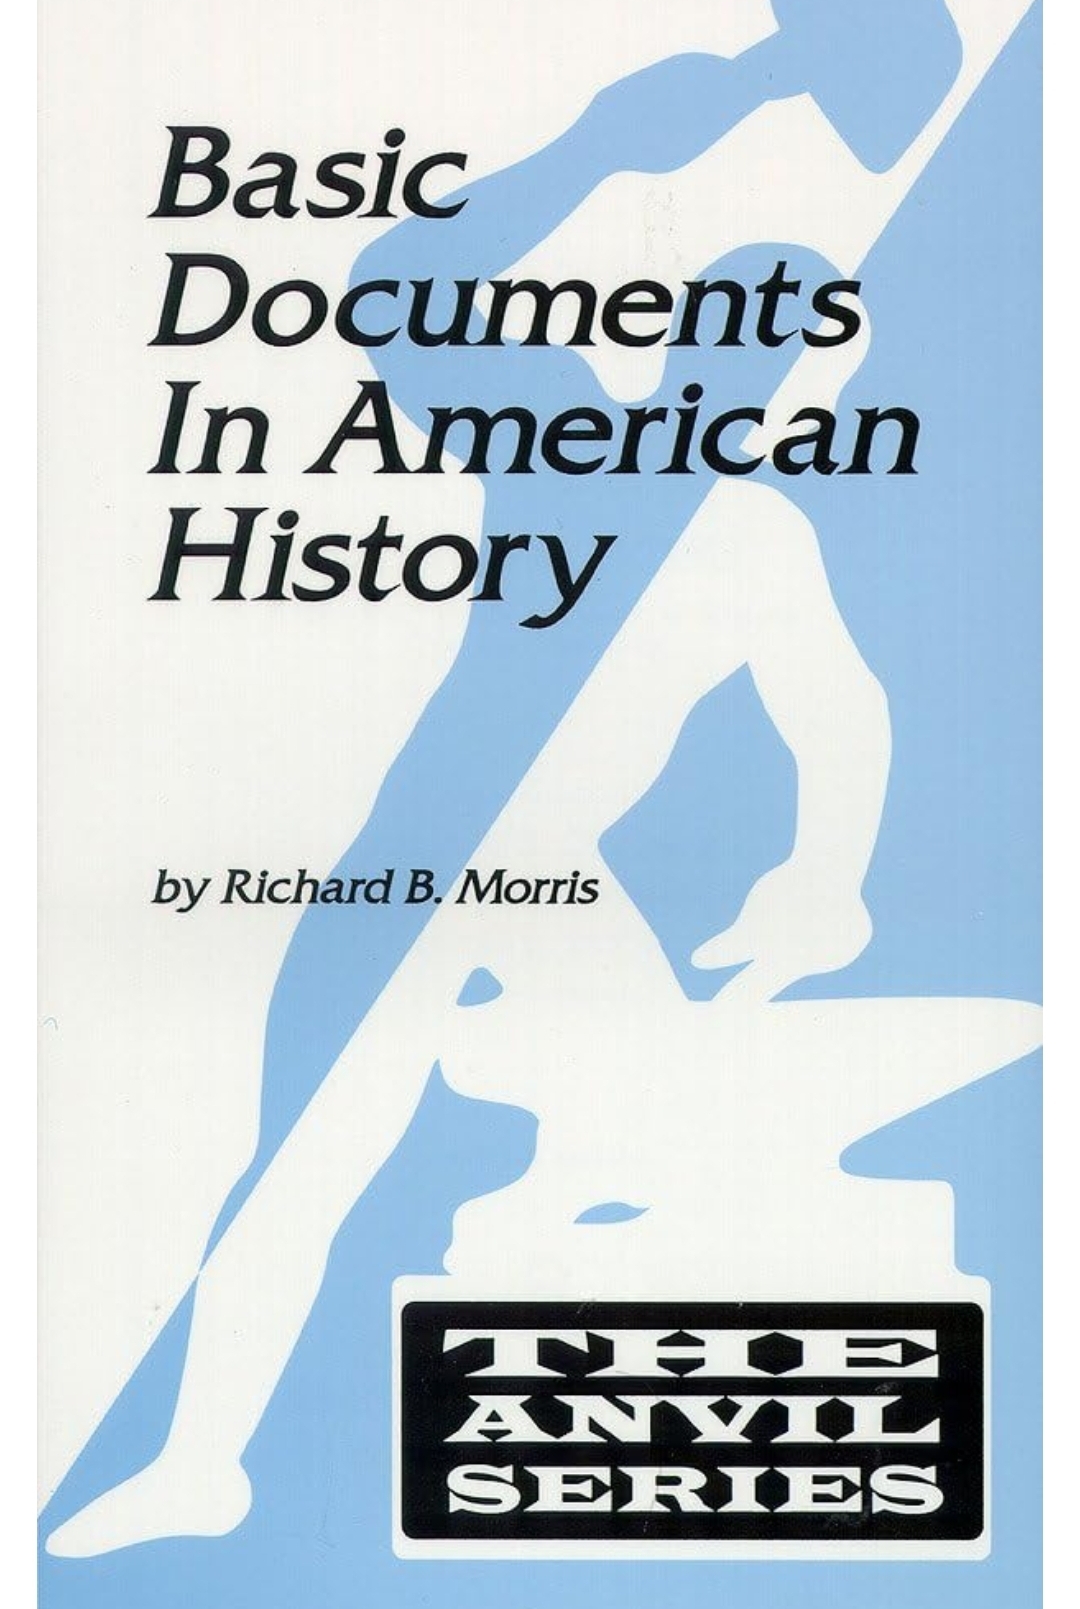 Basic Documents in American History